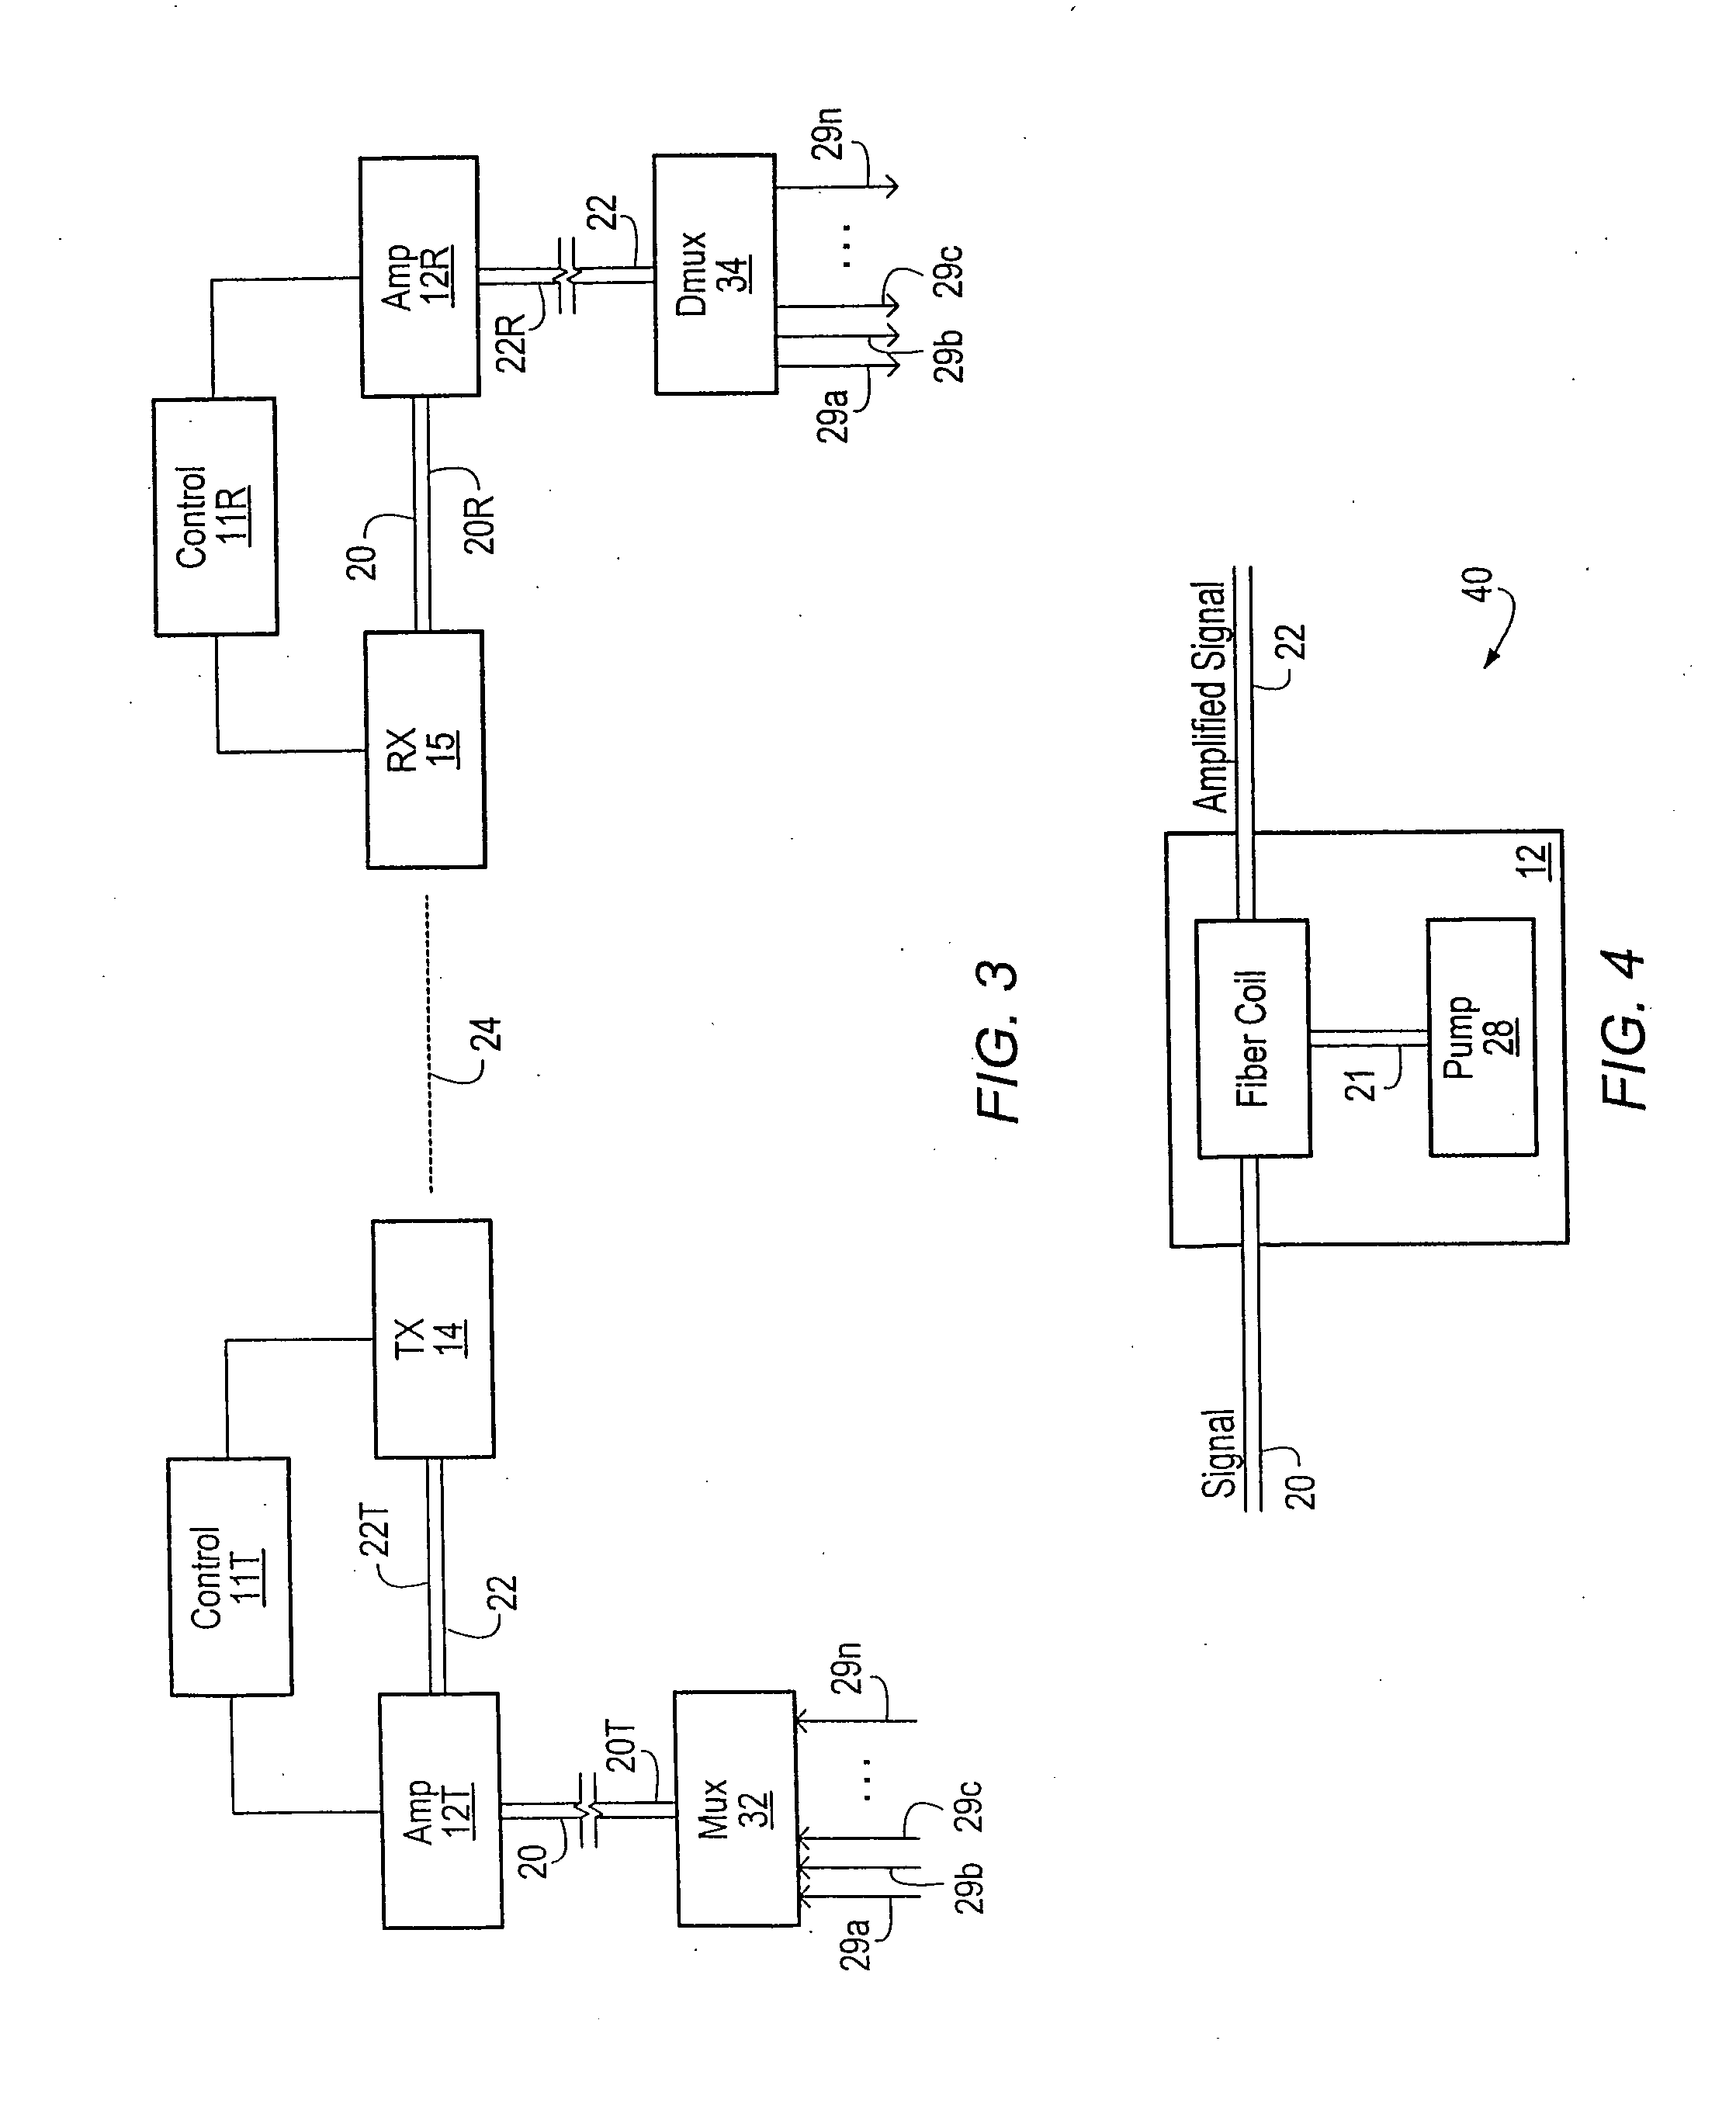 Optical amplifiers in a free space laser communication system